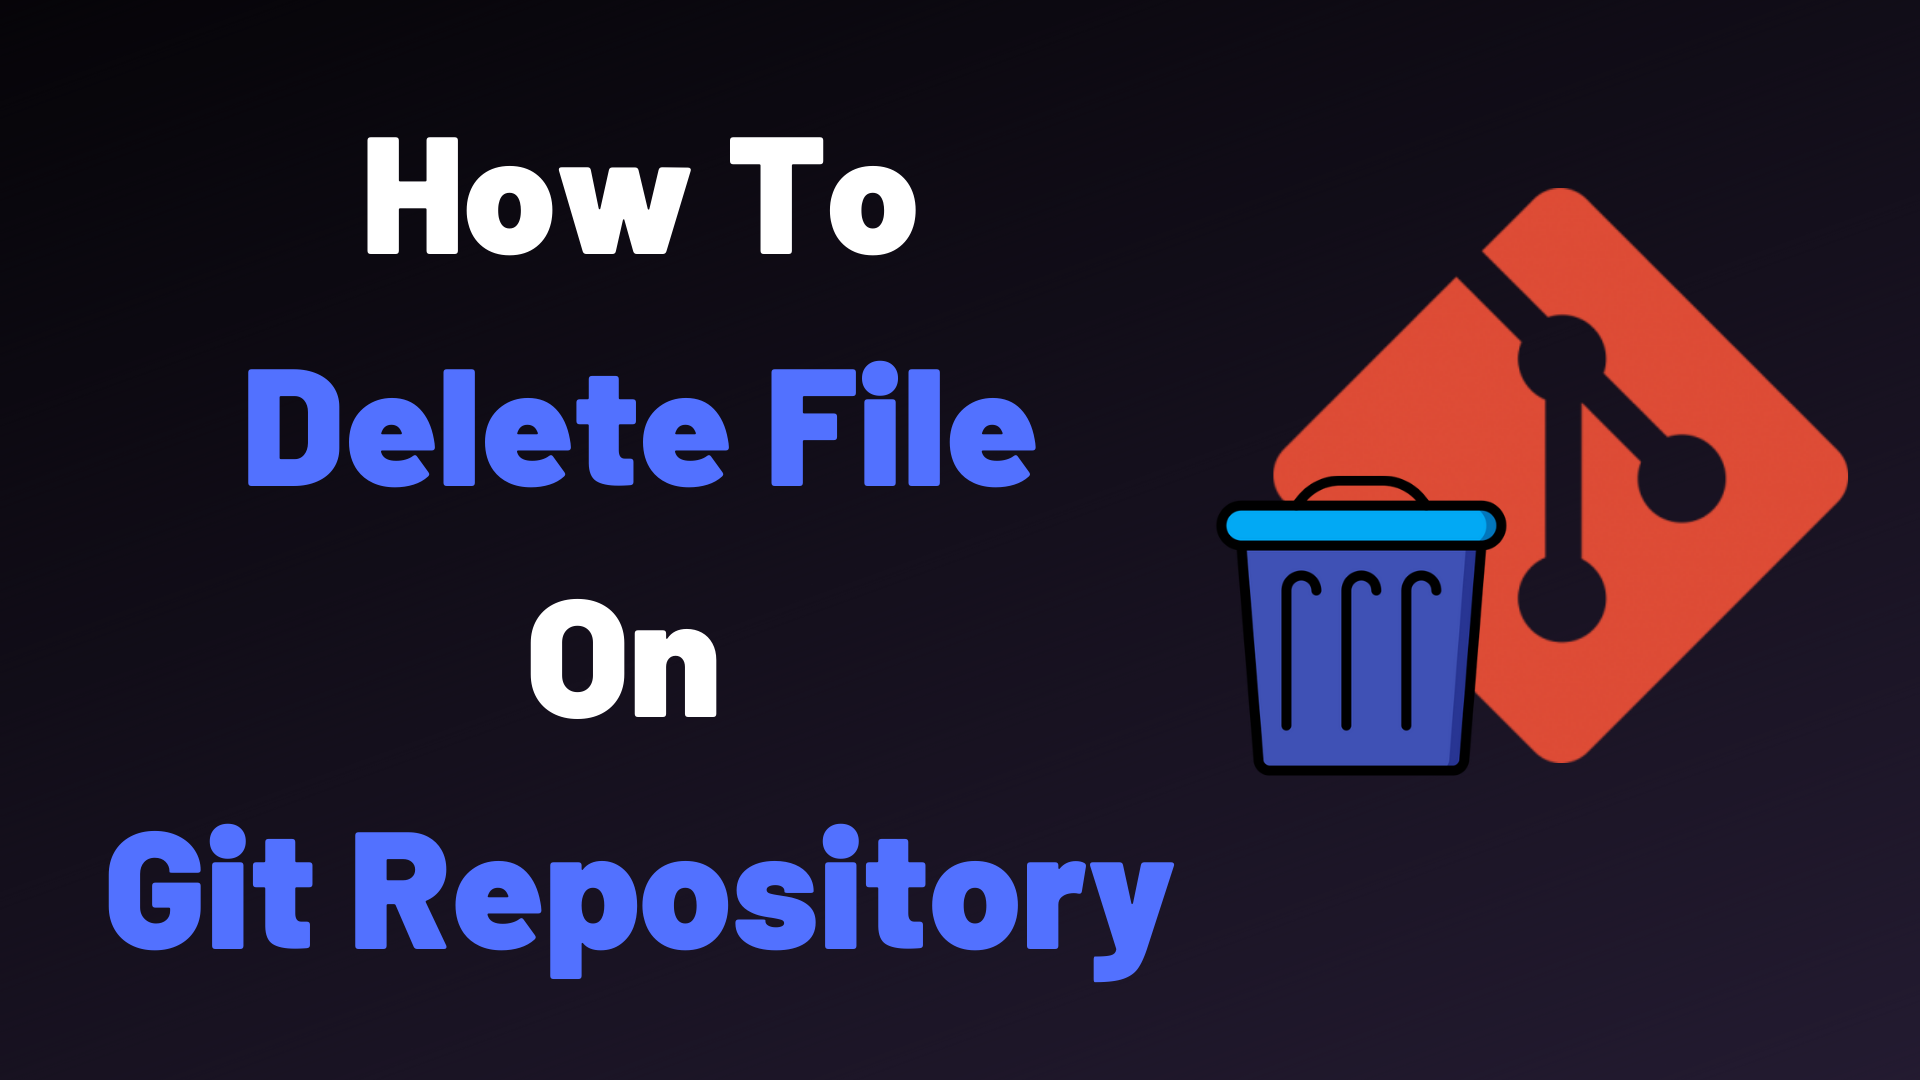 How To Delete File on Git – devconnected